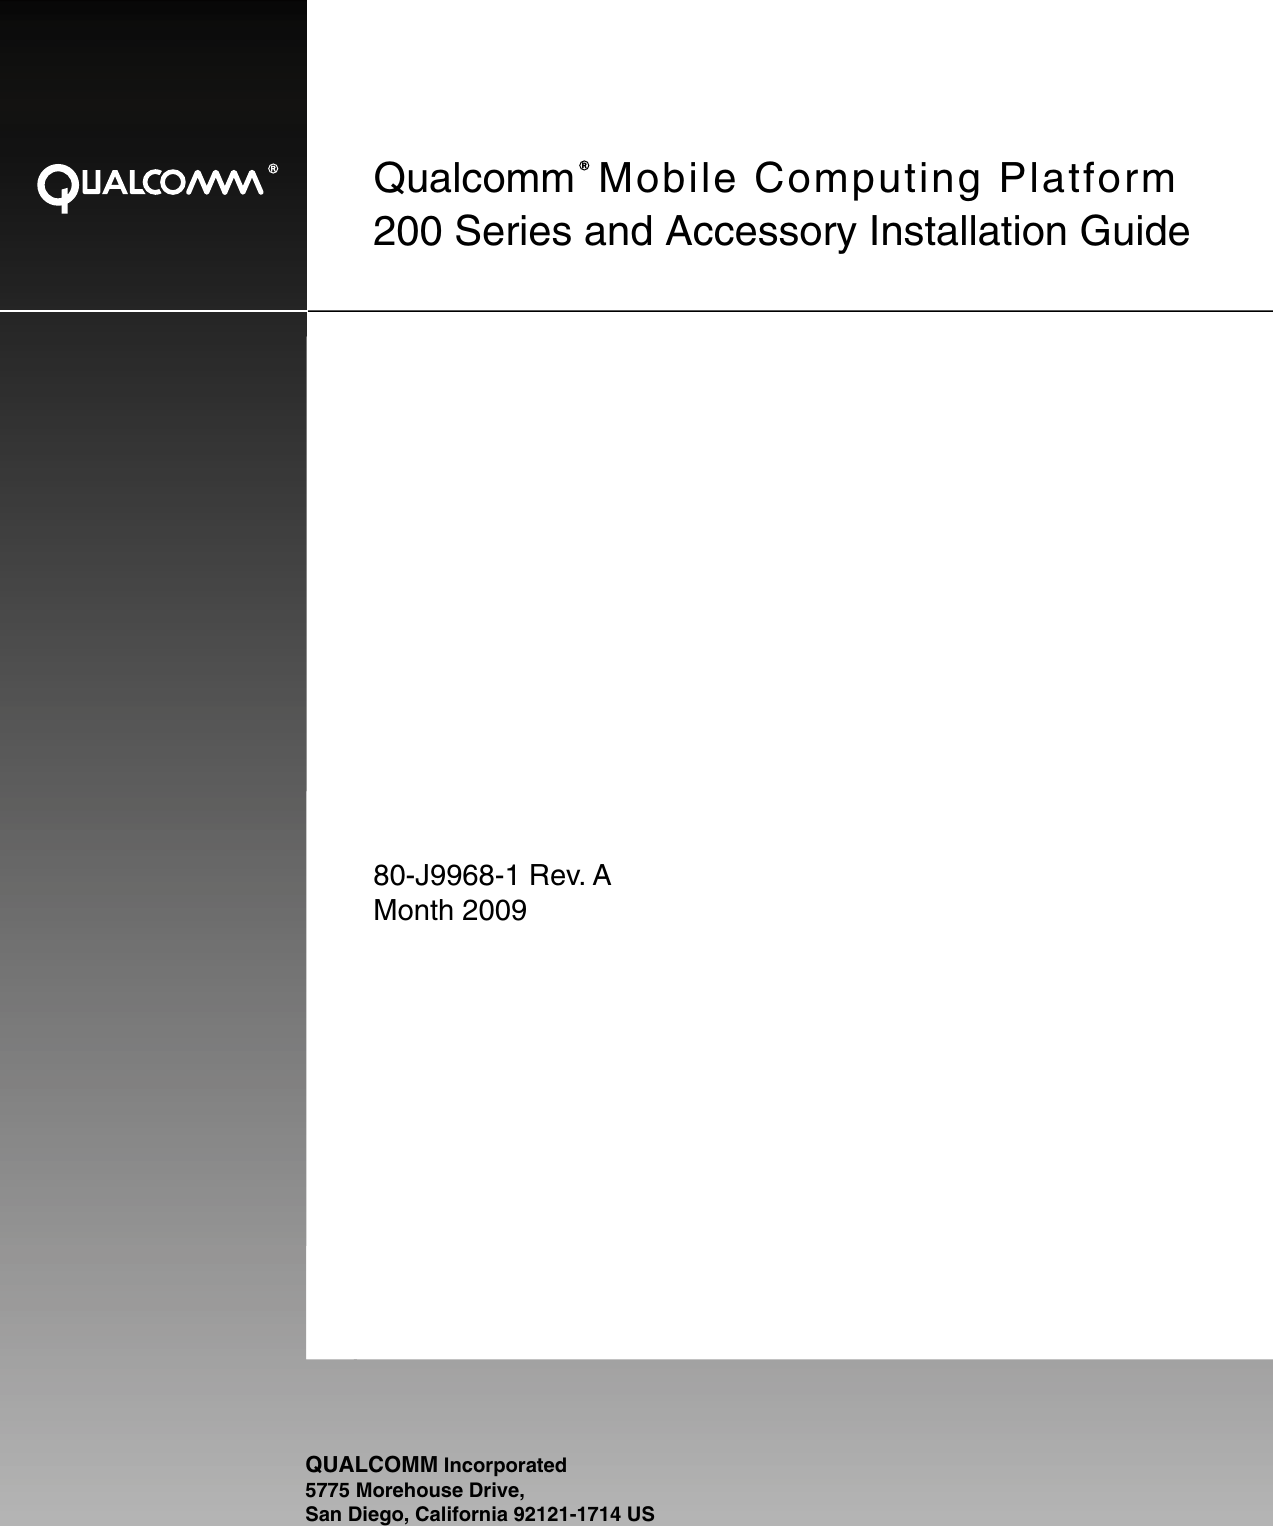 QUALCOMM Incorporated5775 Morehouse Drive, San Diego, California 92121-1714 US200 Series and Accessory Installation GuideQualcomm  Mobile Computing Platform80-J9968-1 Rev. AMonth 2009